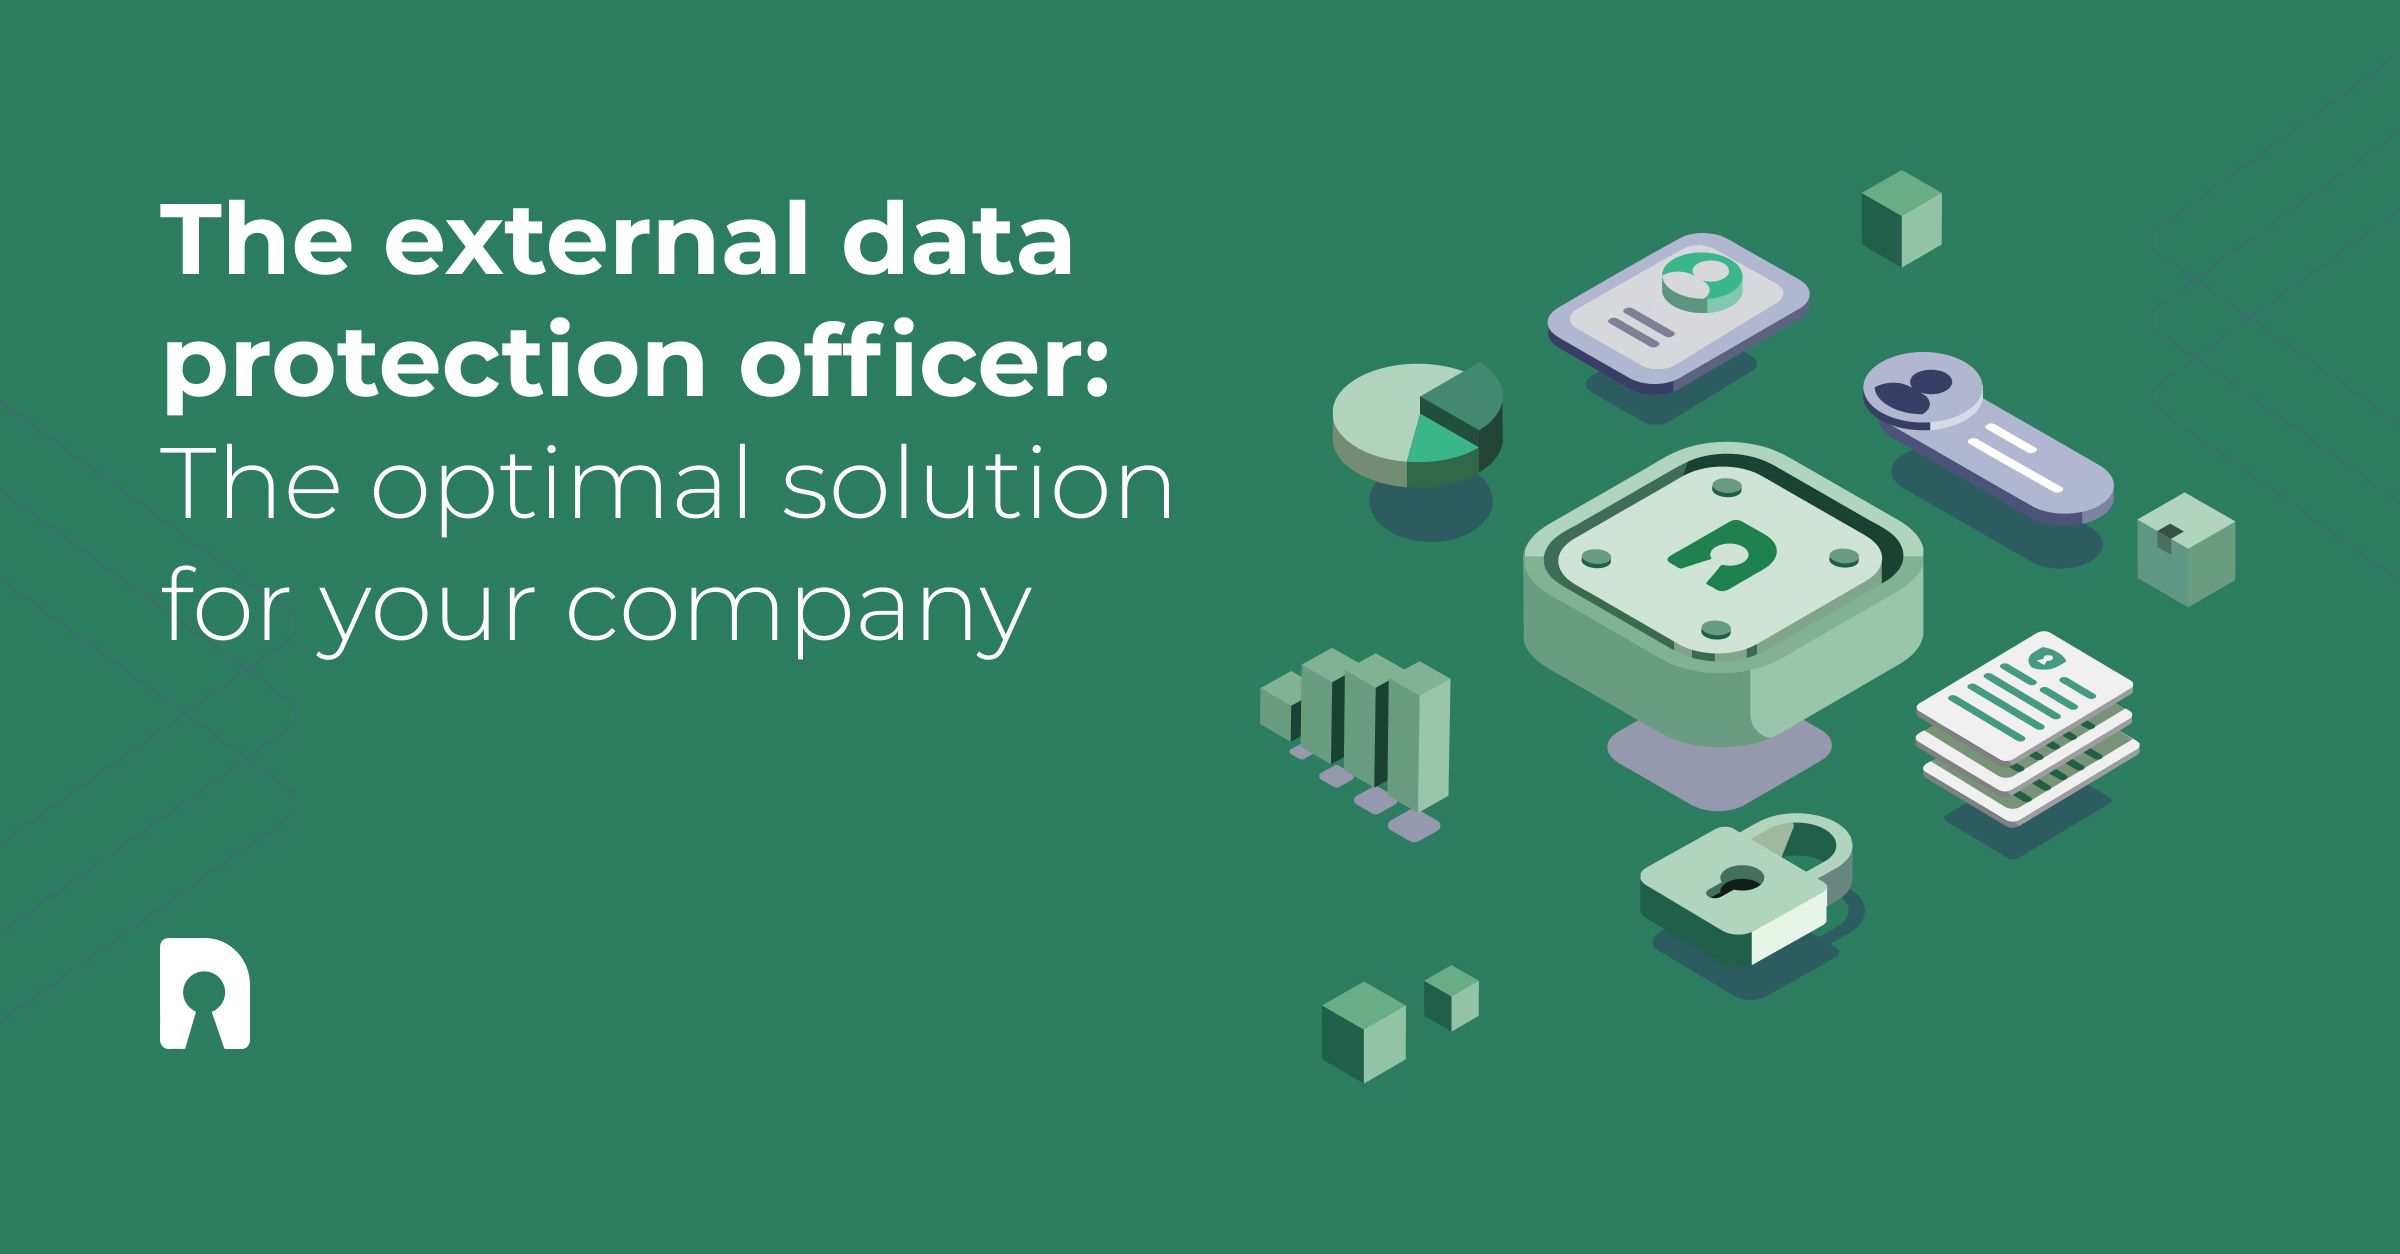 The external data protection officer: The optimal solution for your company